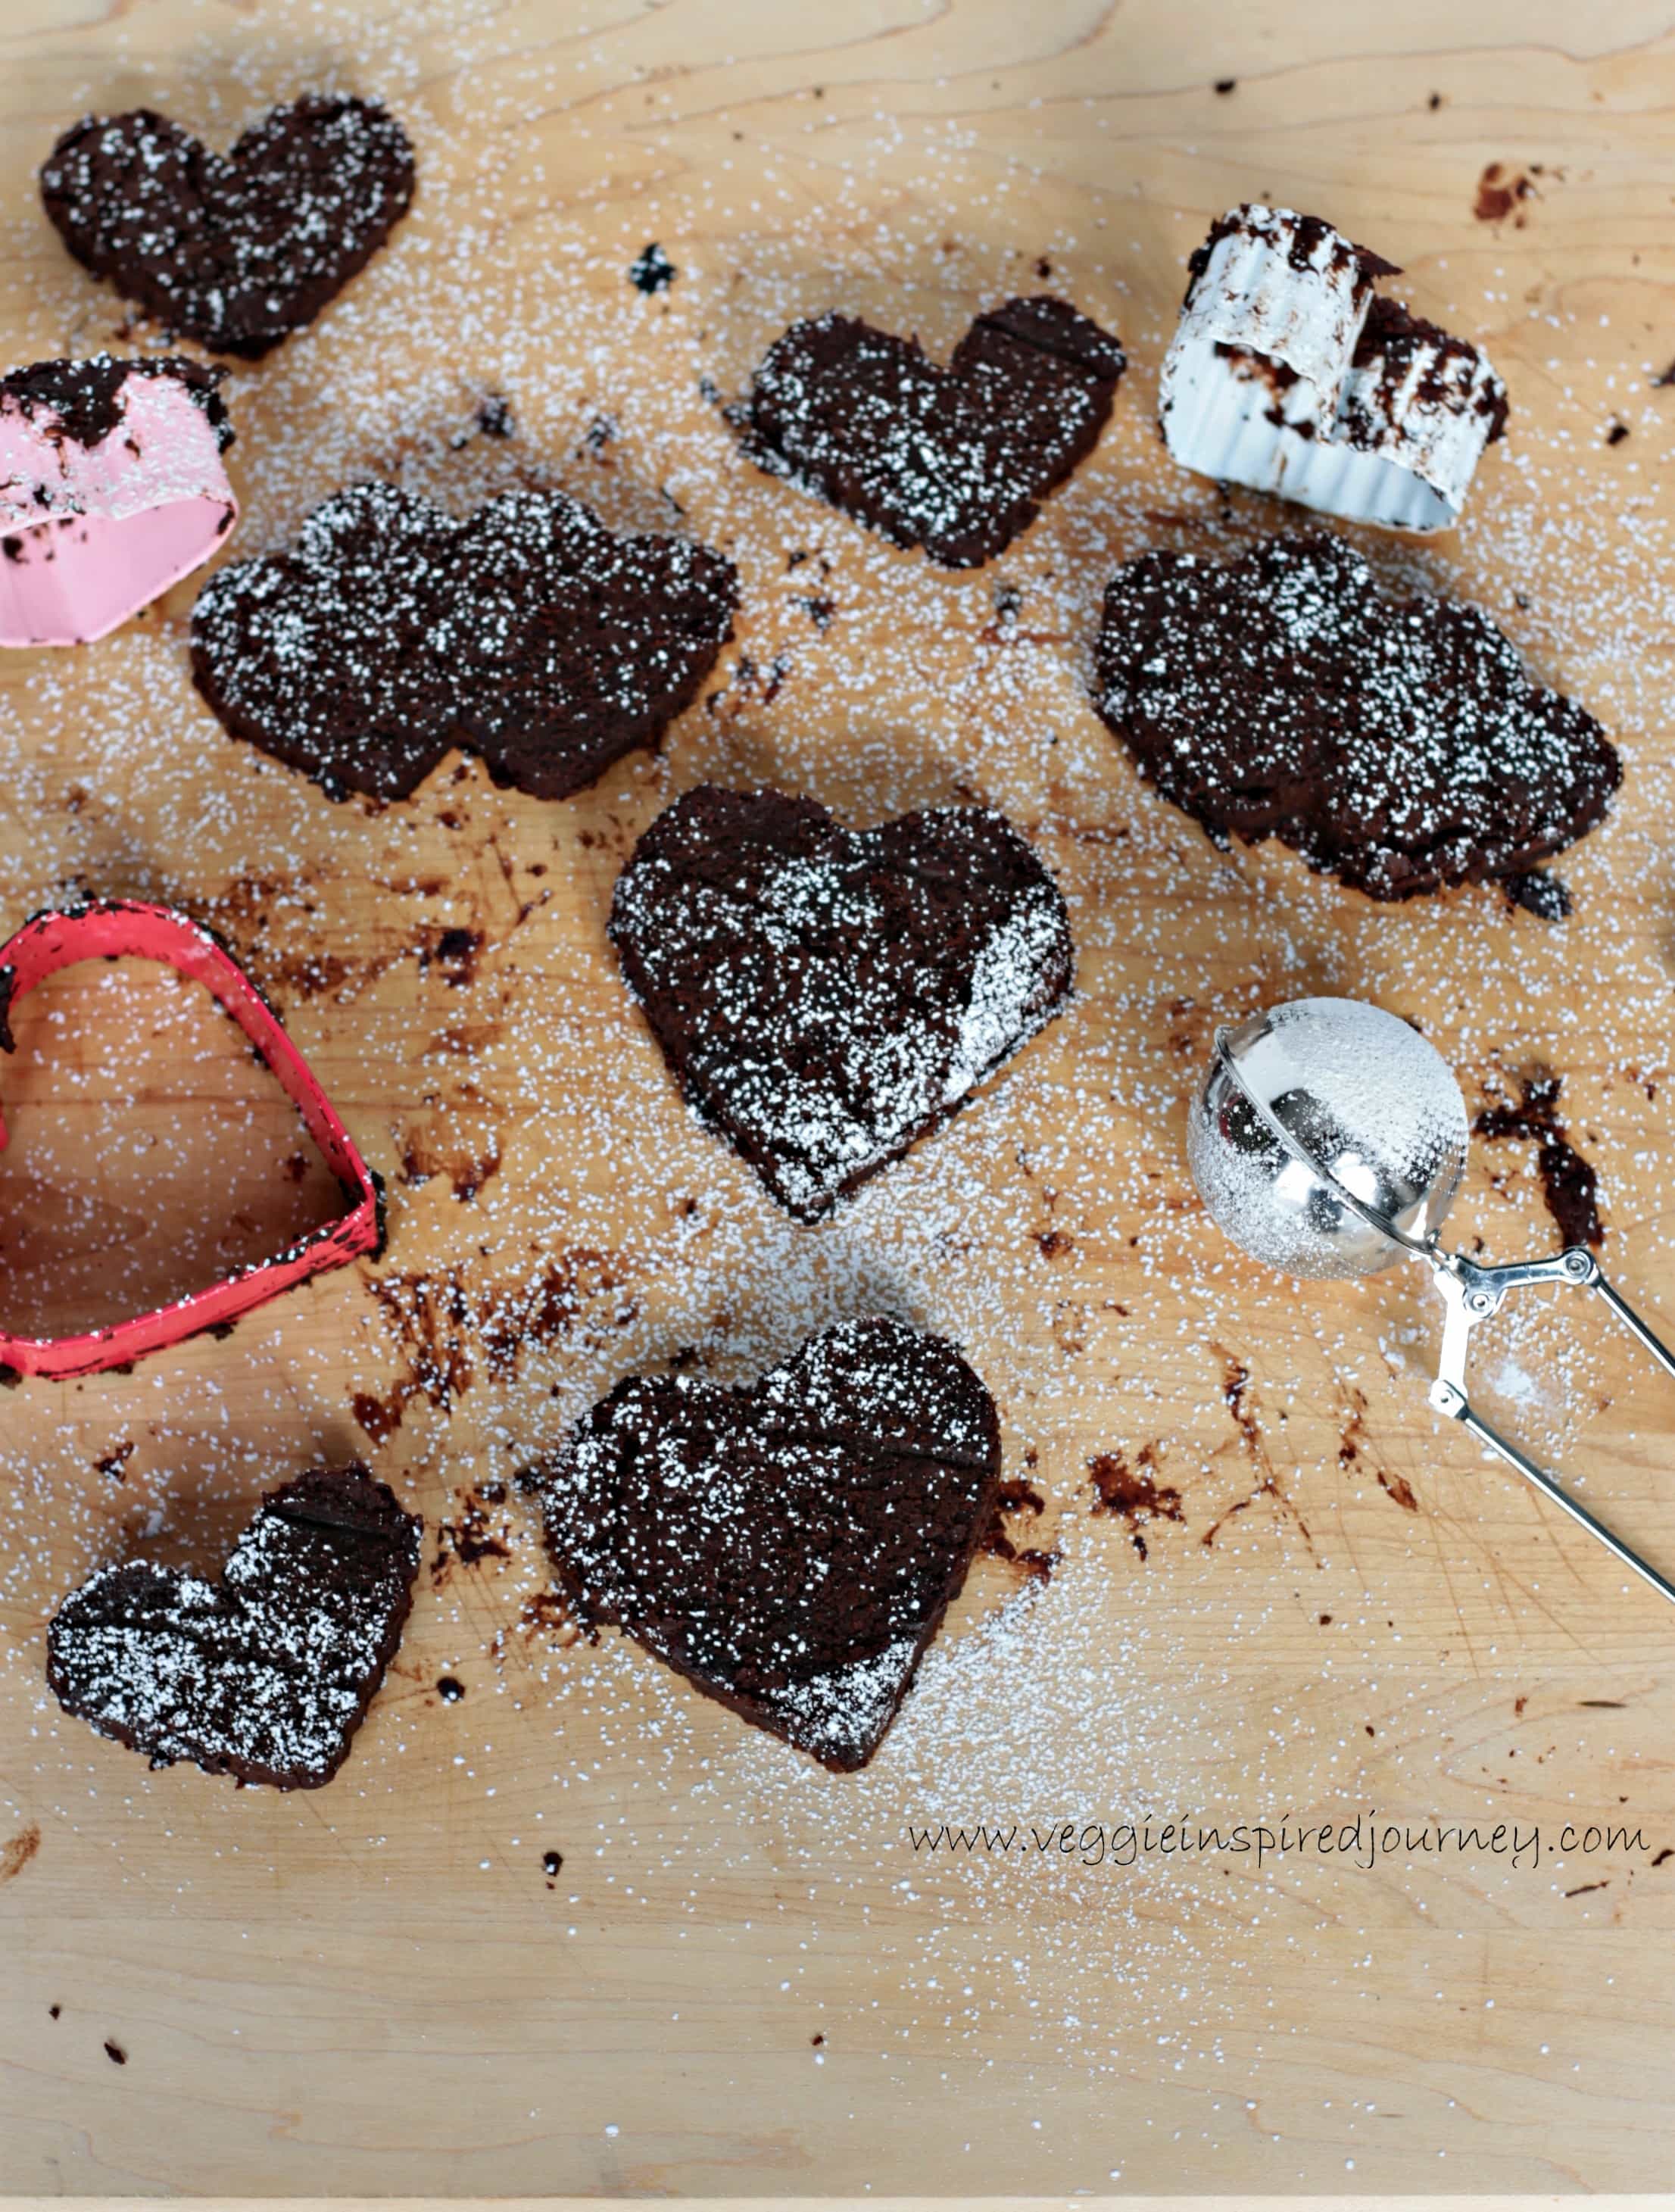 Overhead view of a batch of Fudgy Mocha Black Bean Brownie Hearts next to heart shaped cookie cutters and a small mesh tea ball infuser used to sprinkle powdered sugar.